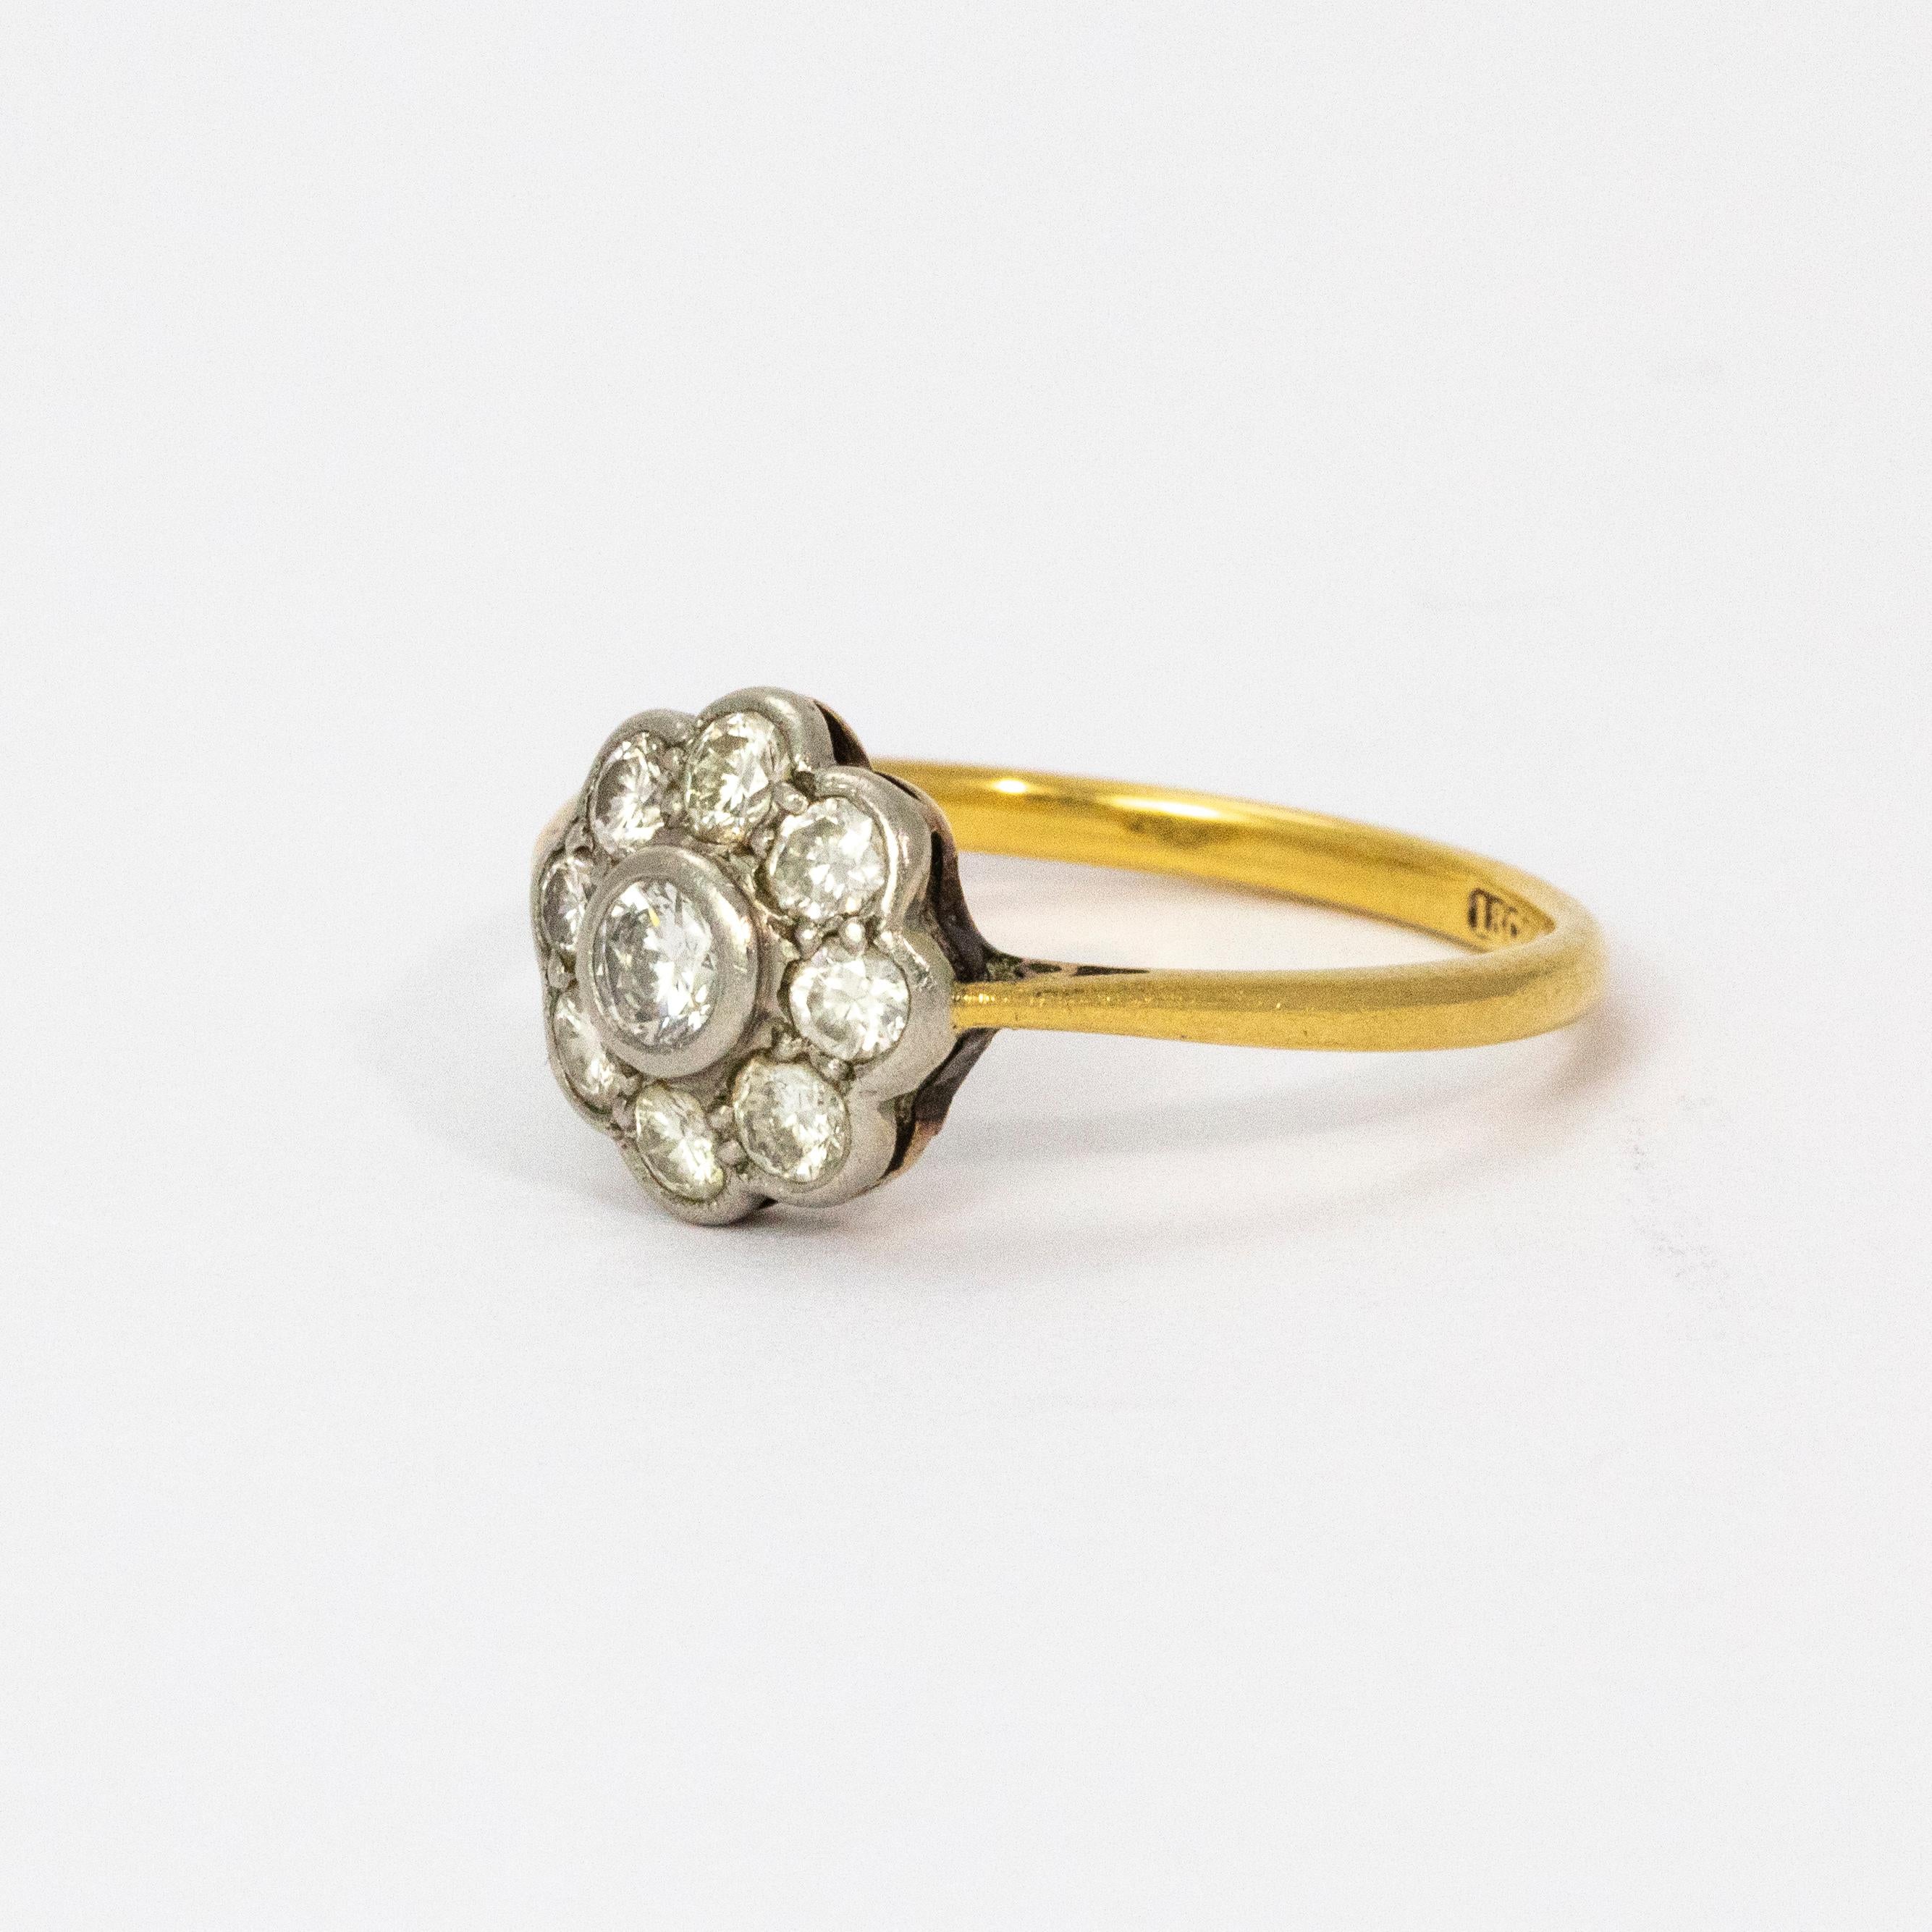 A Stunning vintage cluster ring. A larger white old European cut diamond surrounded by an elegant halo of eight diamonds, total diamond weight 65 points. The stones are set in platinum while the rest of the ring is modelled in 18 karat yellow